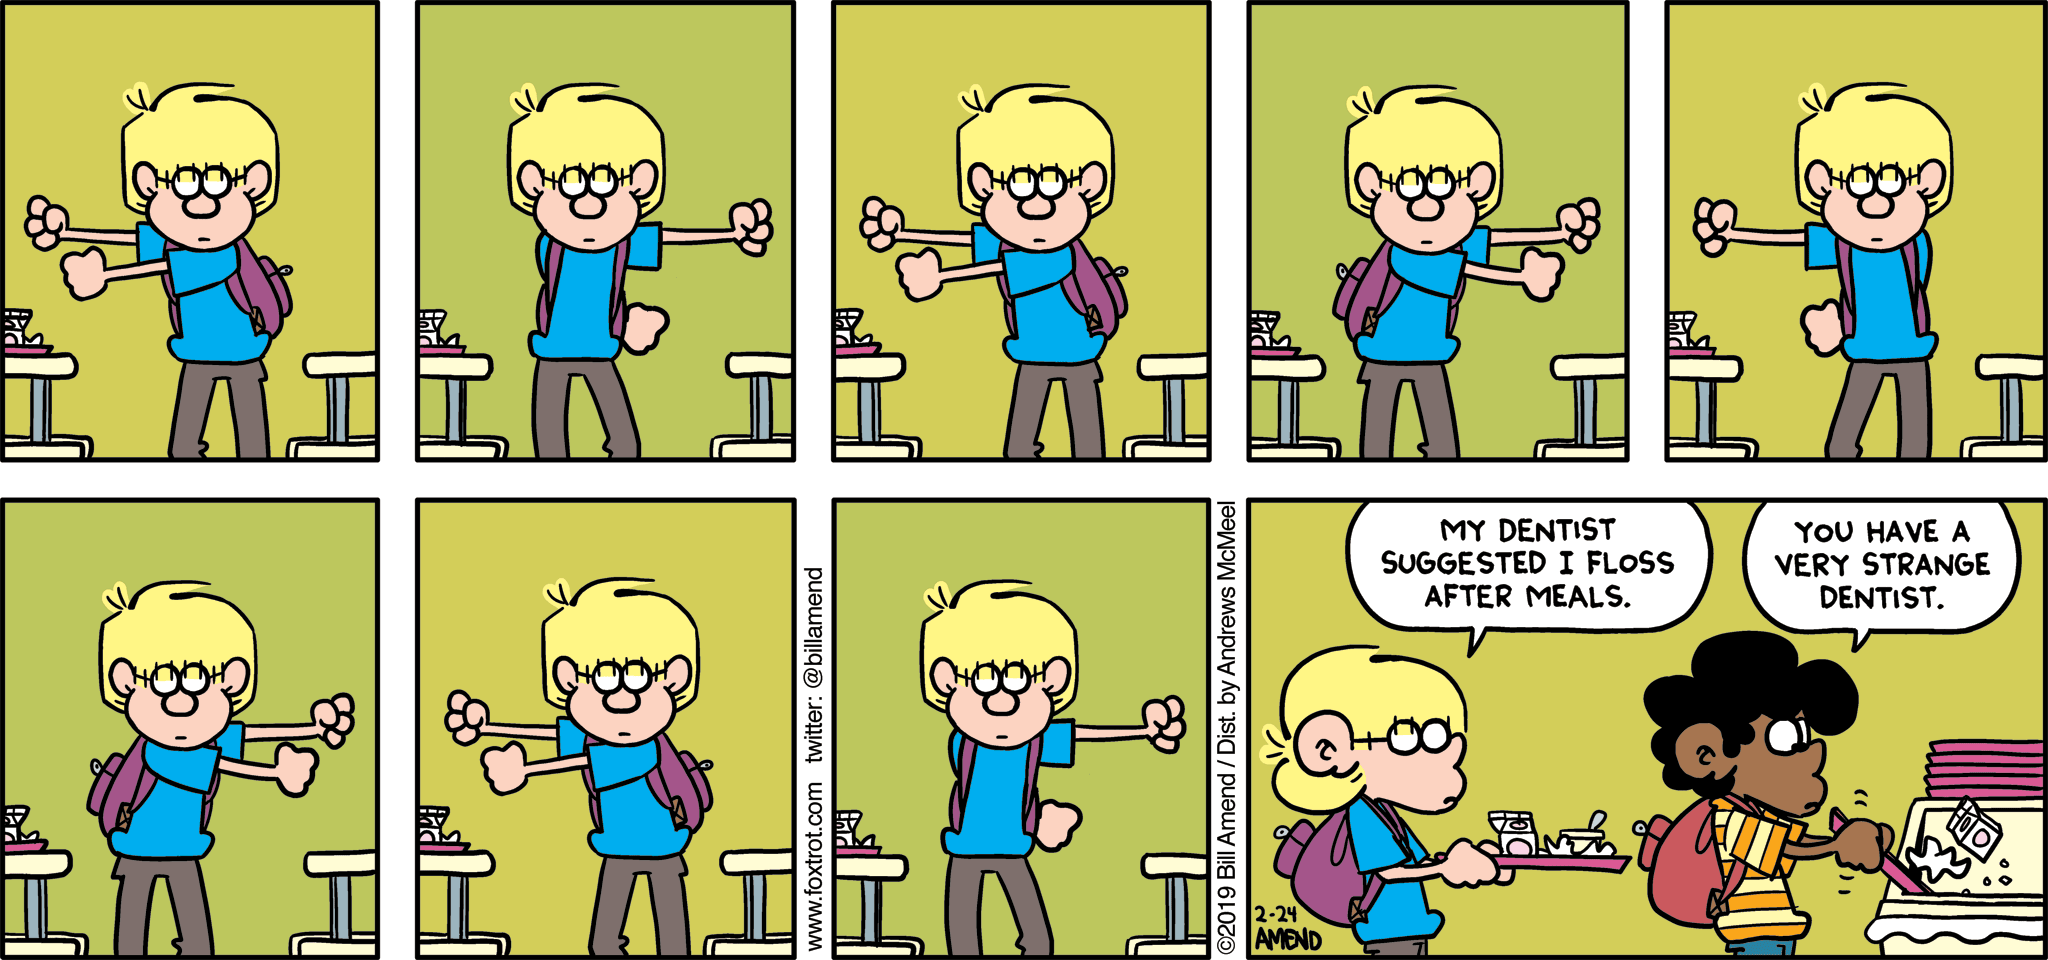 FoxTrot by Bill Amend - "Flossing" published February 24, 2019 - Jason says: My dentist suggested I floss after meals. Marcus says: You have a very strange dentist.